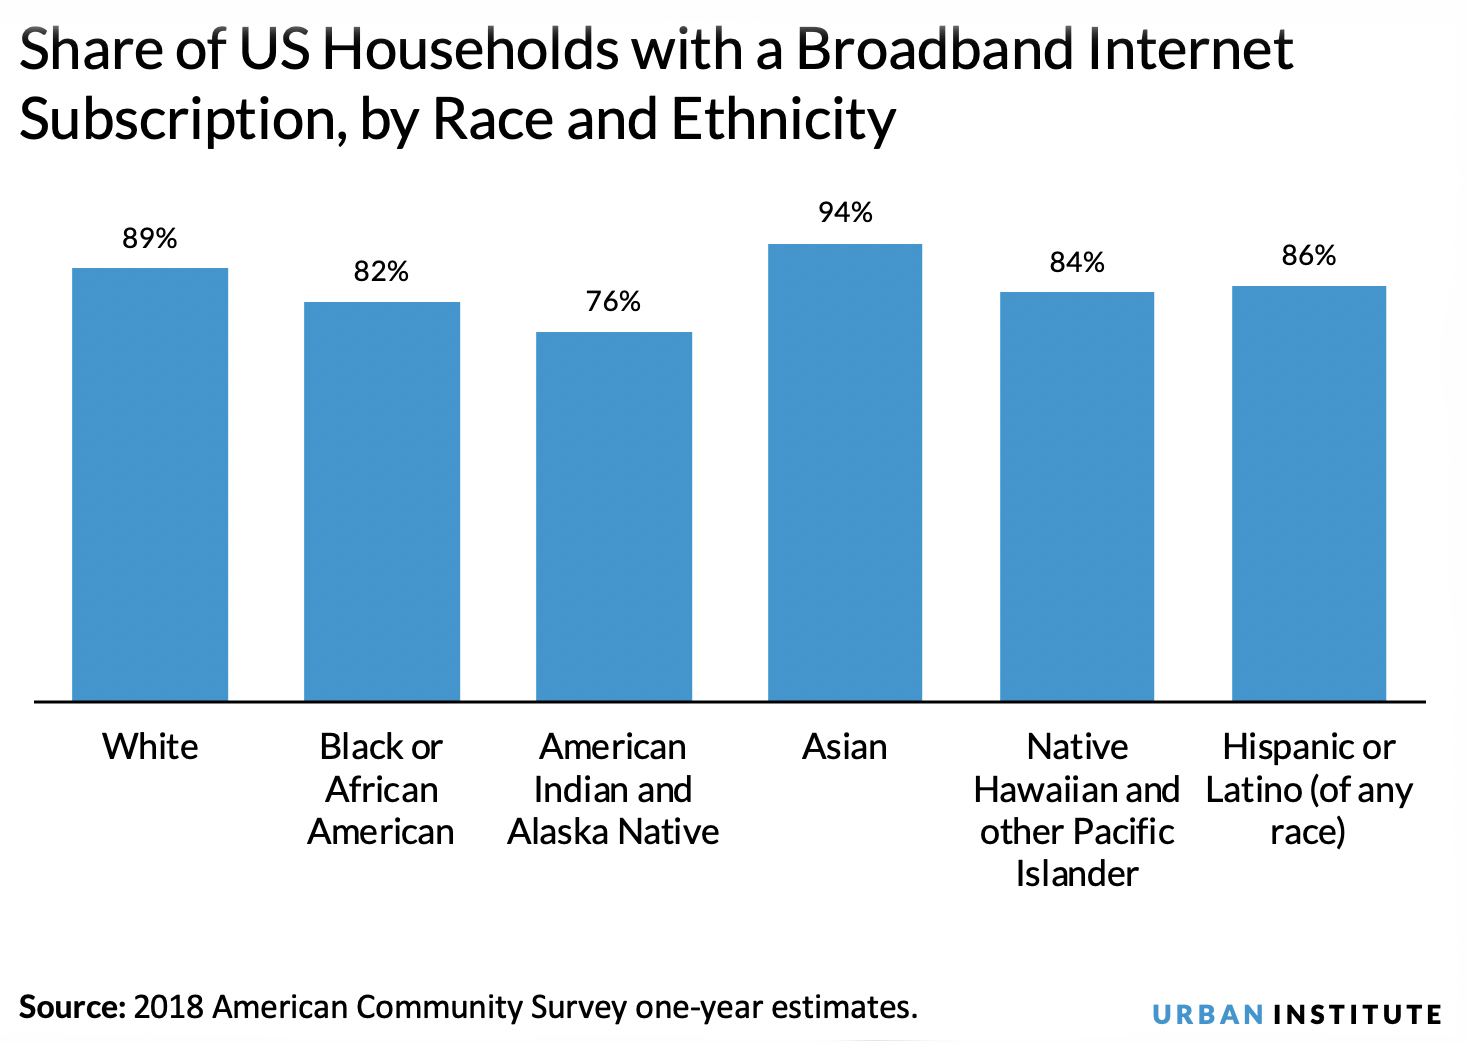 Share of households with broadband access by race/ethnicity chart